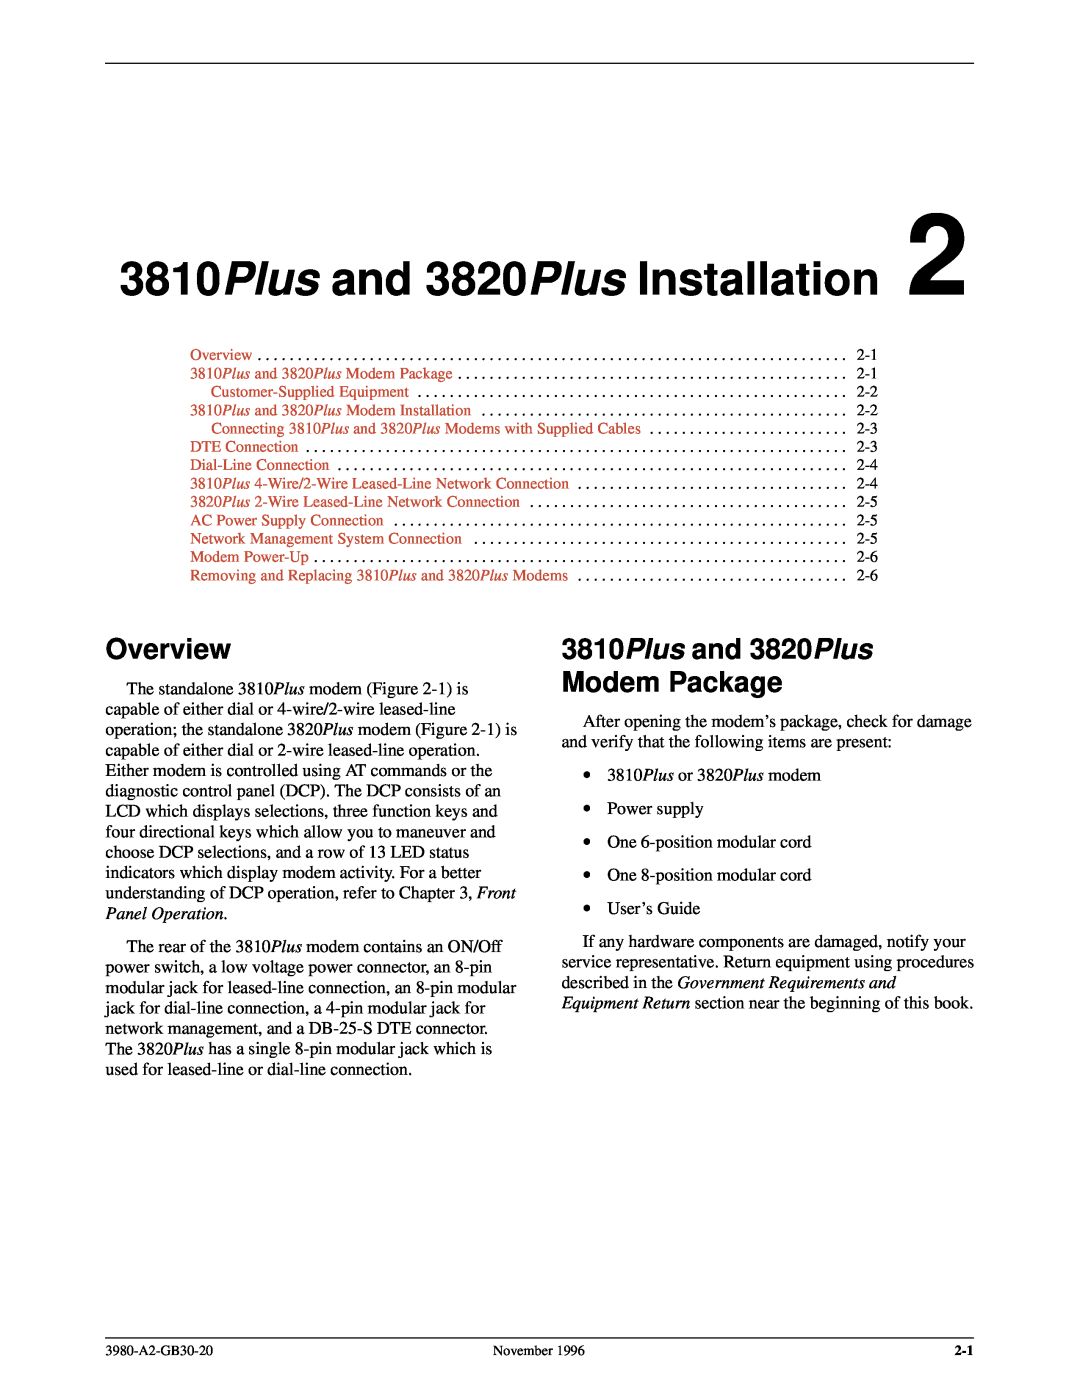 Paradyne 3800PLUS manual 3810Plus and 3820Plus Installation, 3810Plus and 3820Plus Modem Package, Overview 